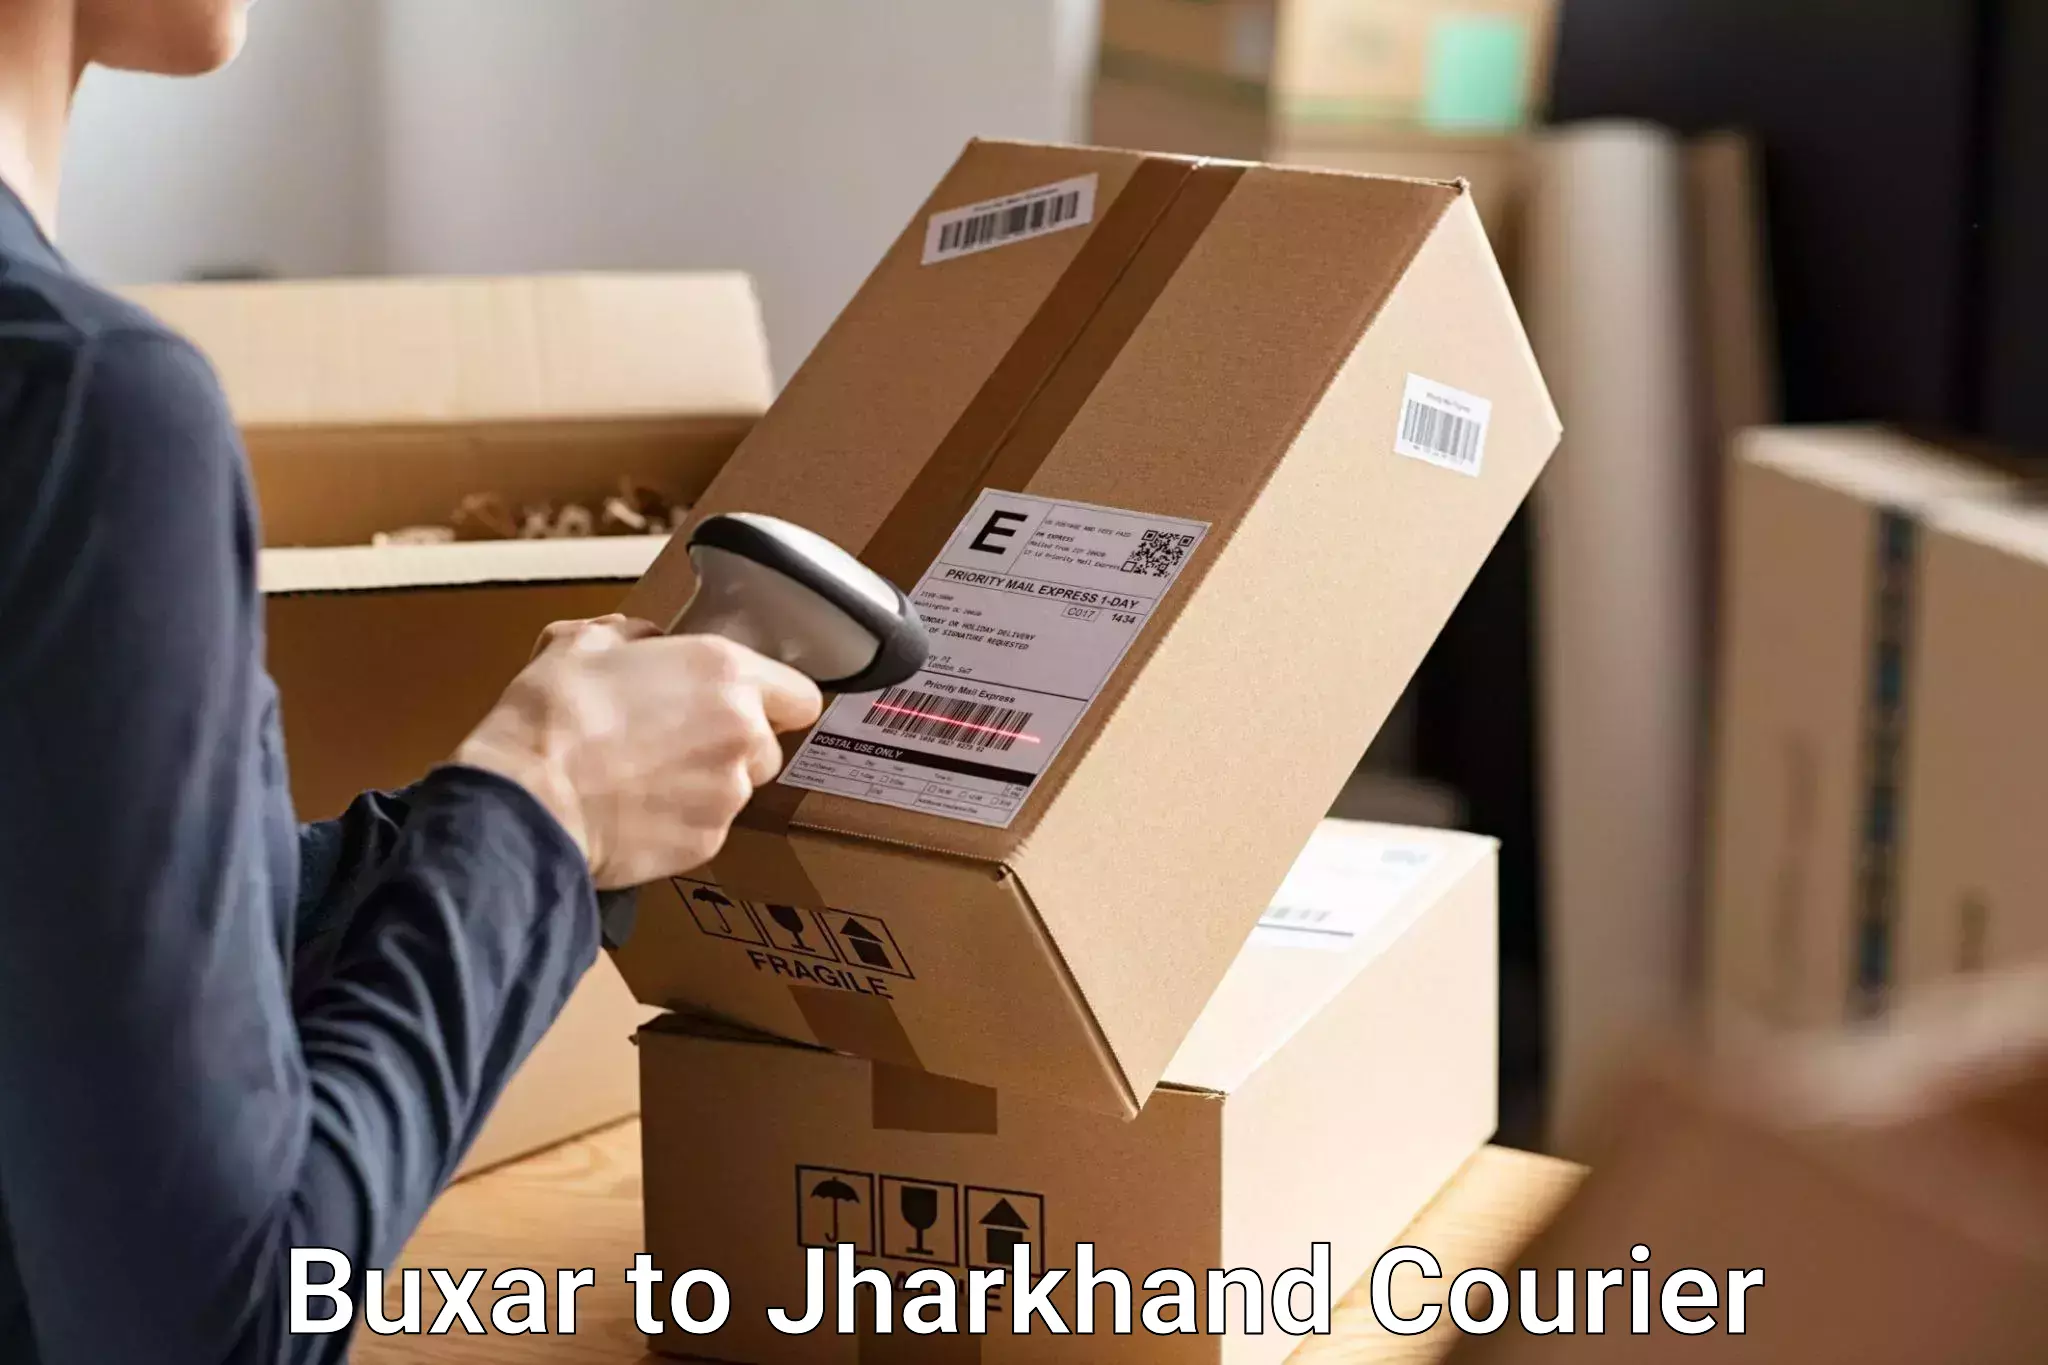 Airport luggage delivery Buxar to Jamshedpur